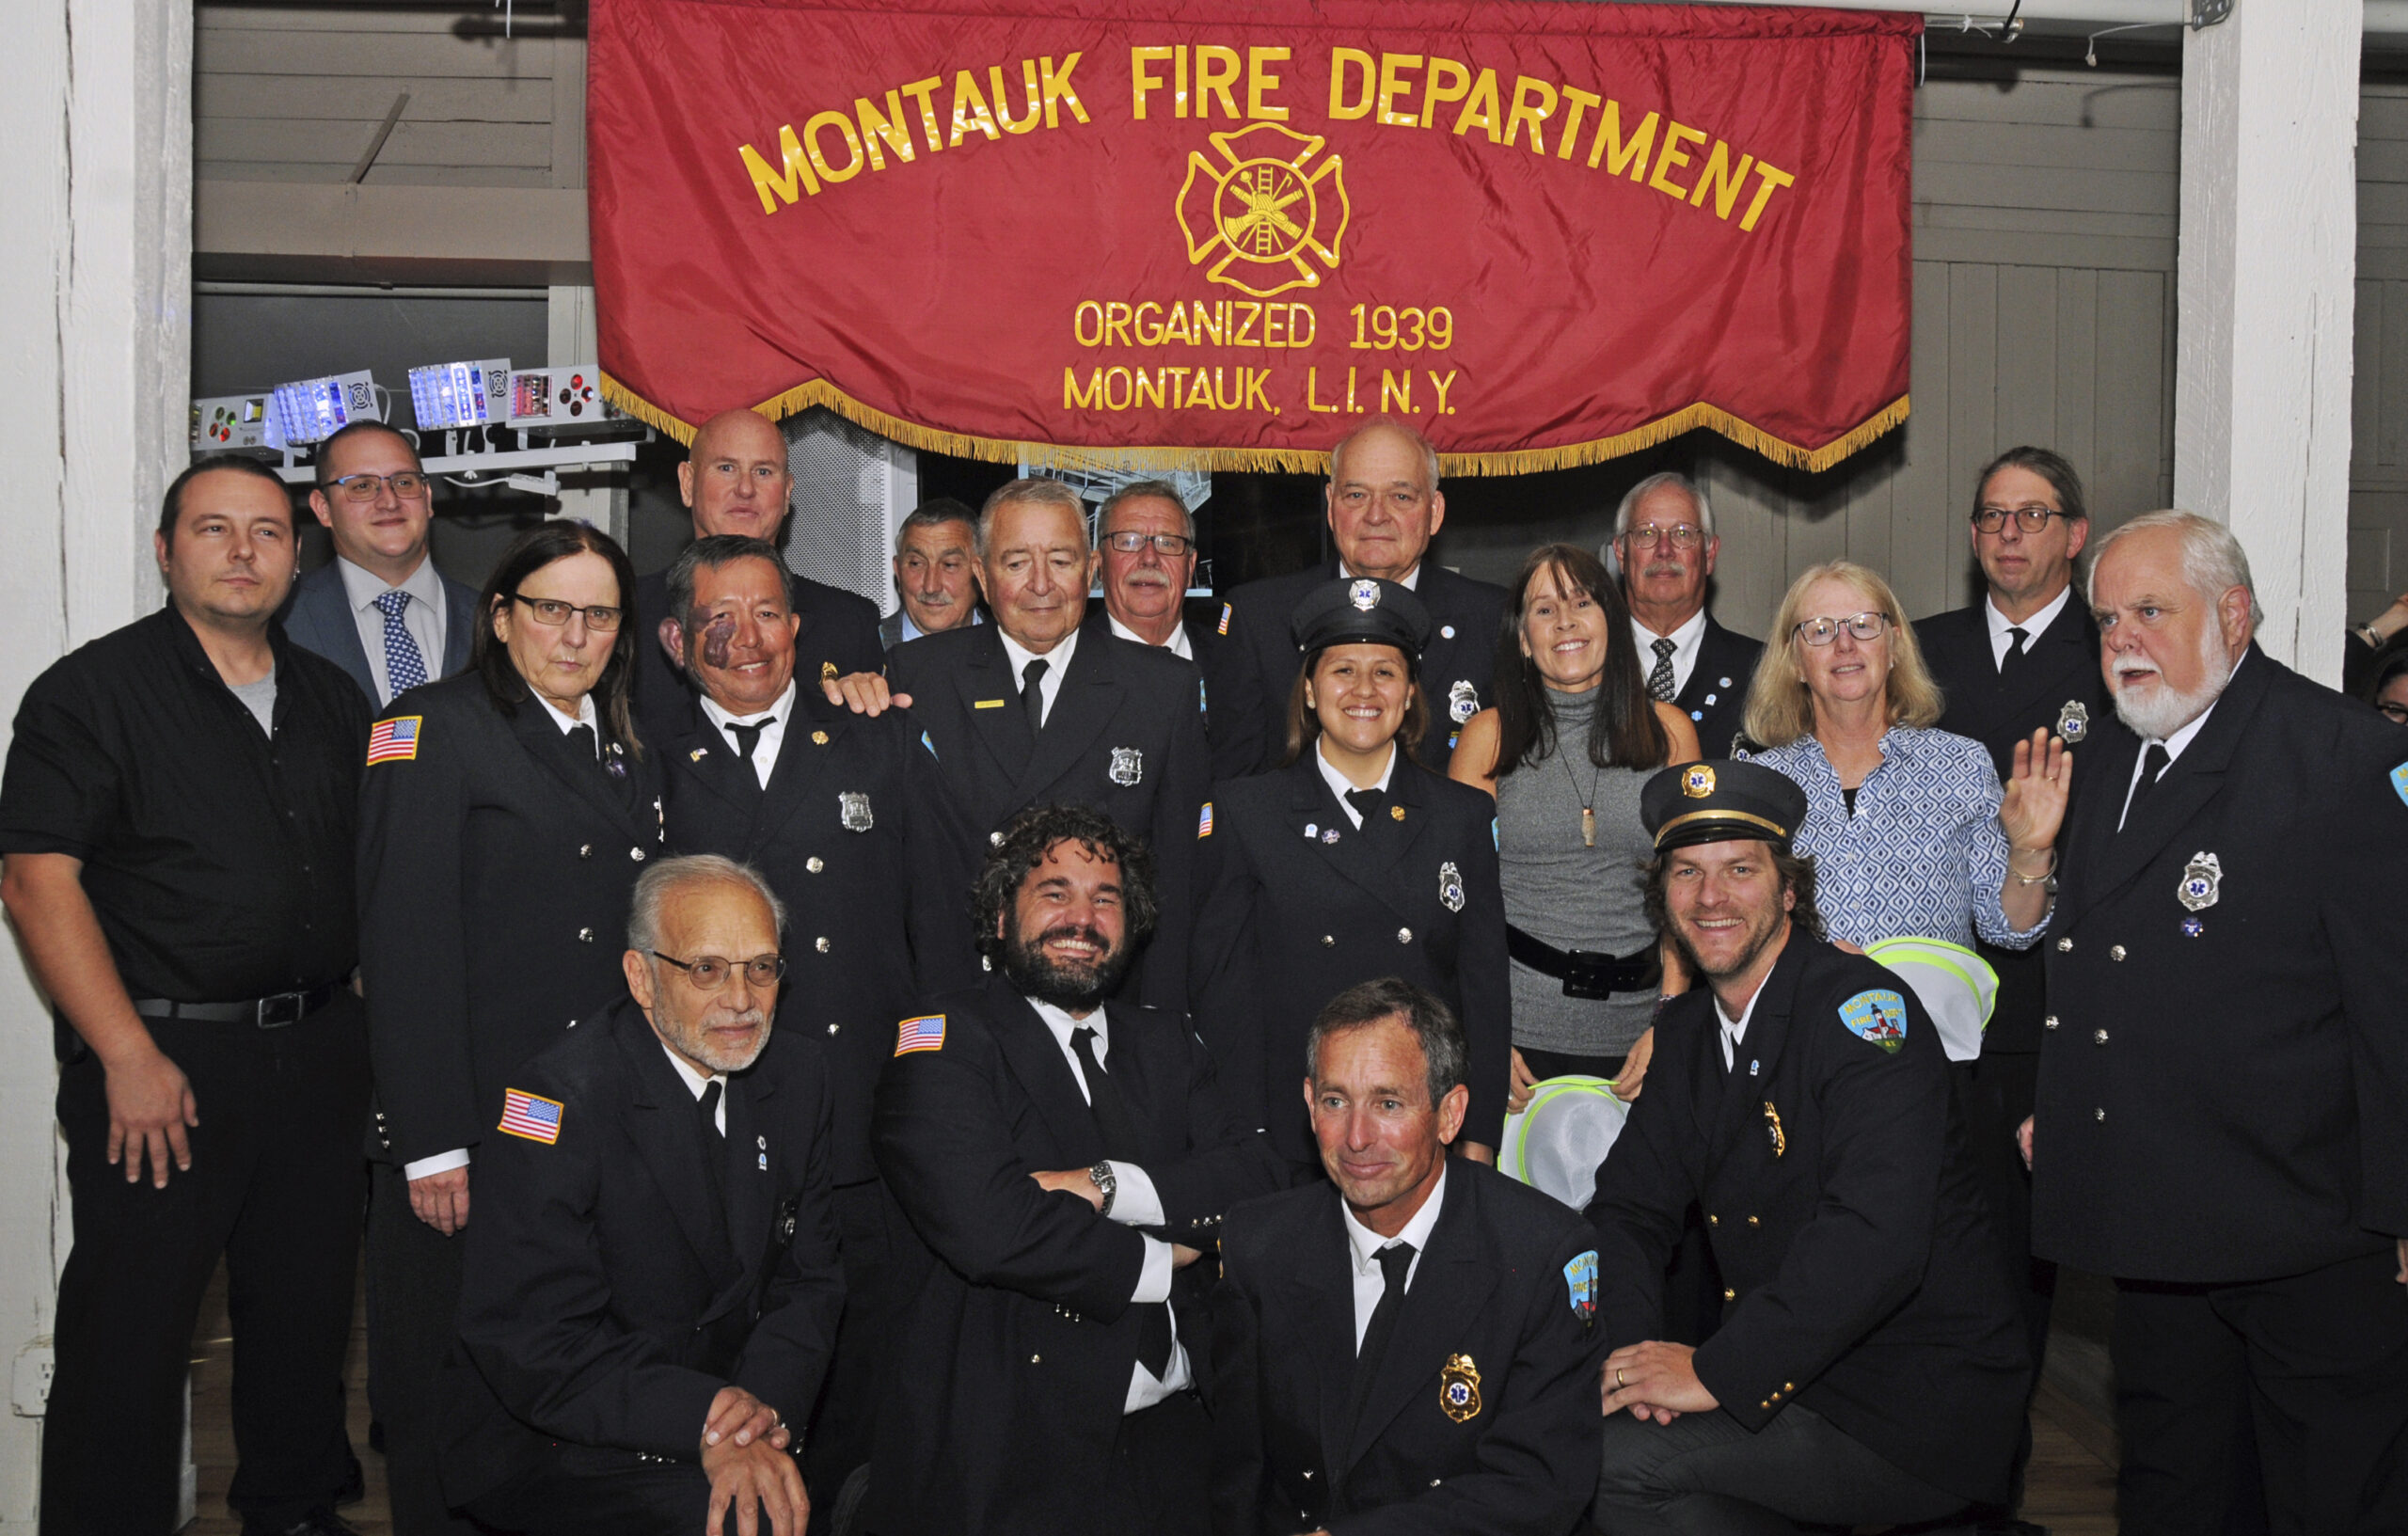 Montauk Fire Department Ambulance Company No. 4 won Company of the Year for 2020 at the department's inspection dinner on Friday evening at at Gosman's Restaurant.  RICHARD LEWIN